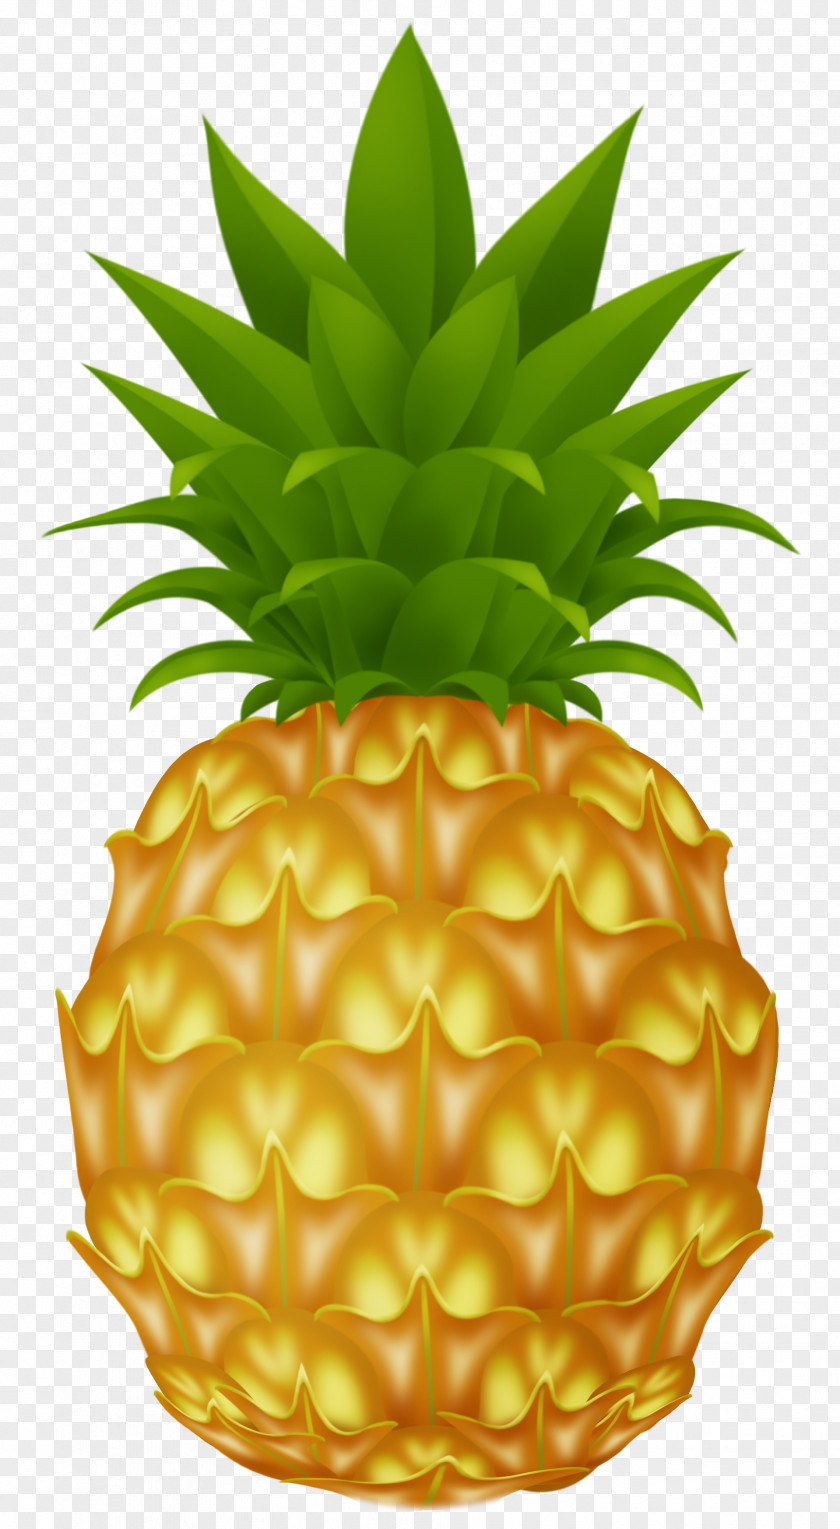 Pineapple Picture Cartoon Clip Art PNG